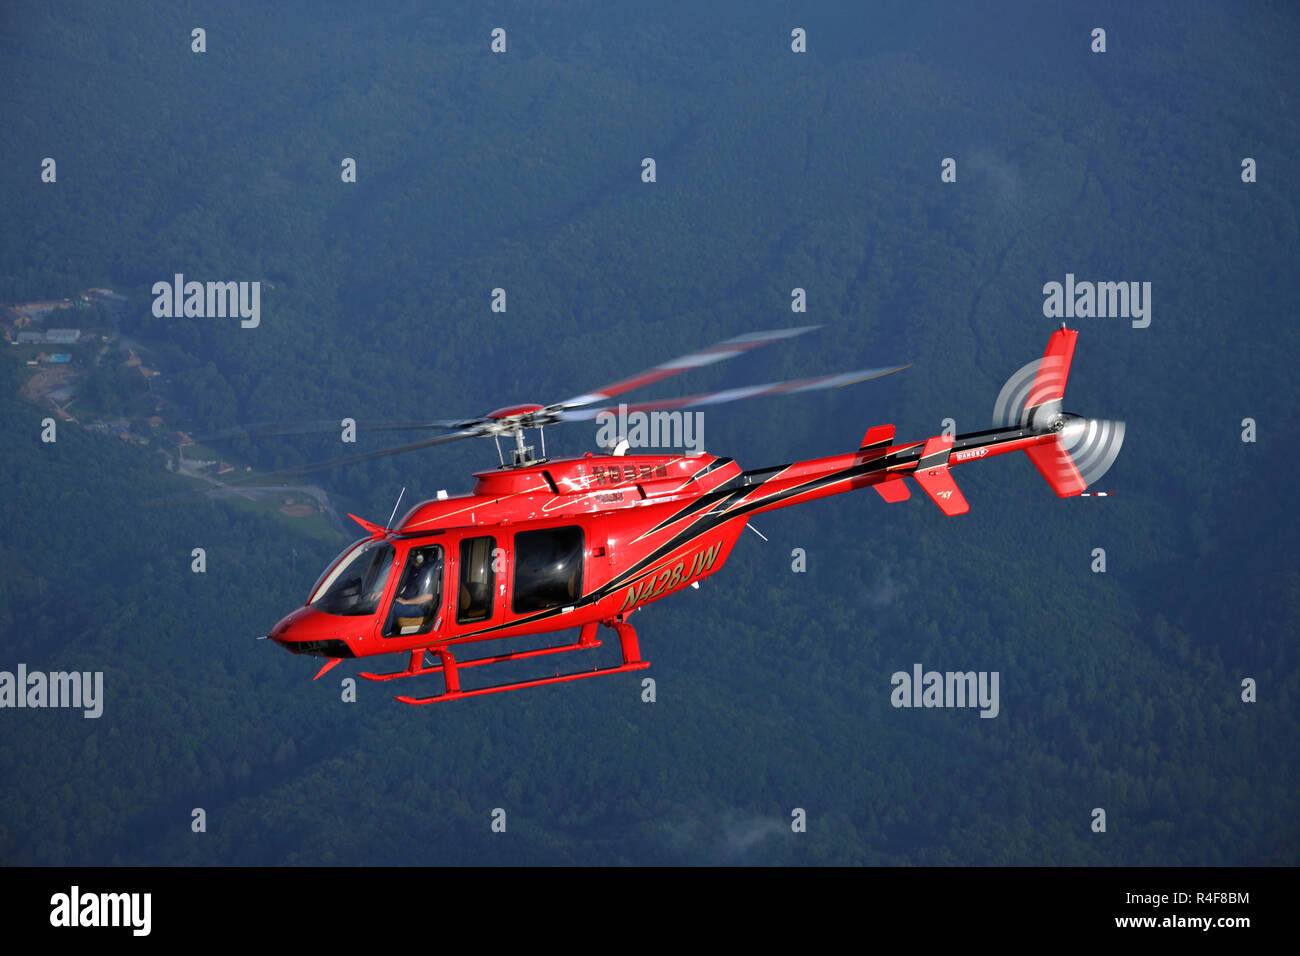 Bell 407 Civilian Helicopter Stock Photo